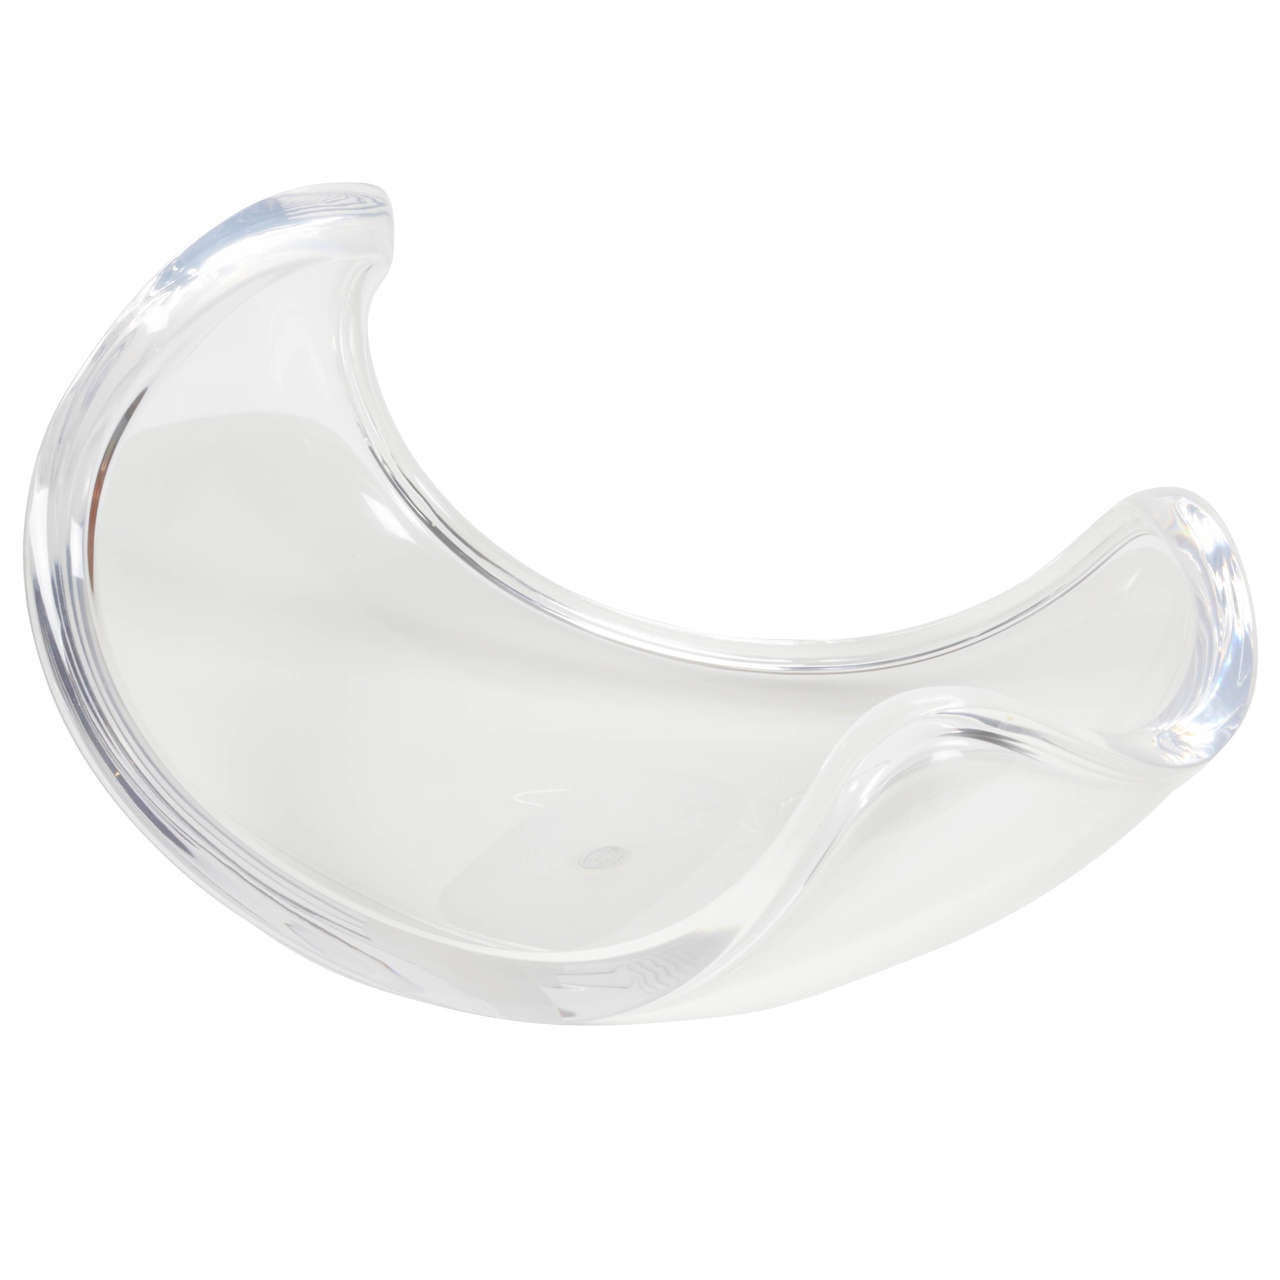 Fantastic and Large Ritts Co. Lucite Freeform Centerpiece Bowl